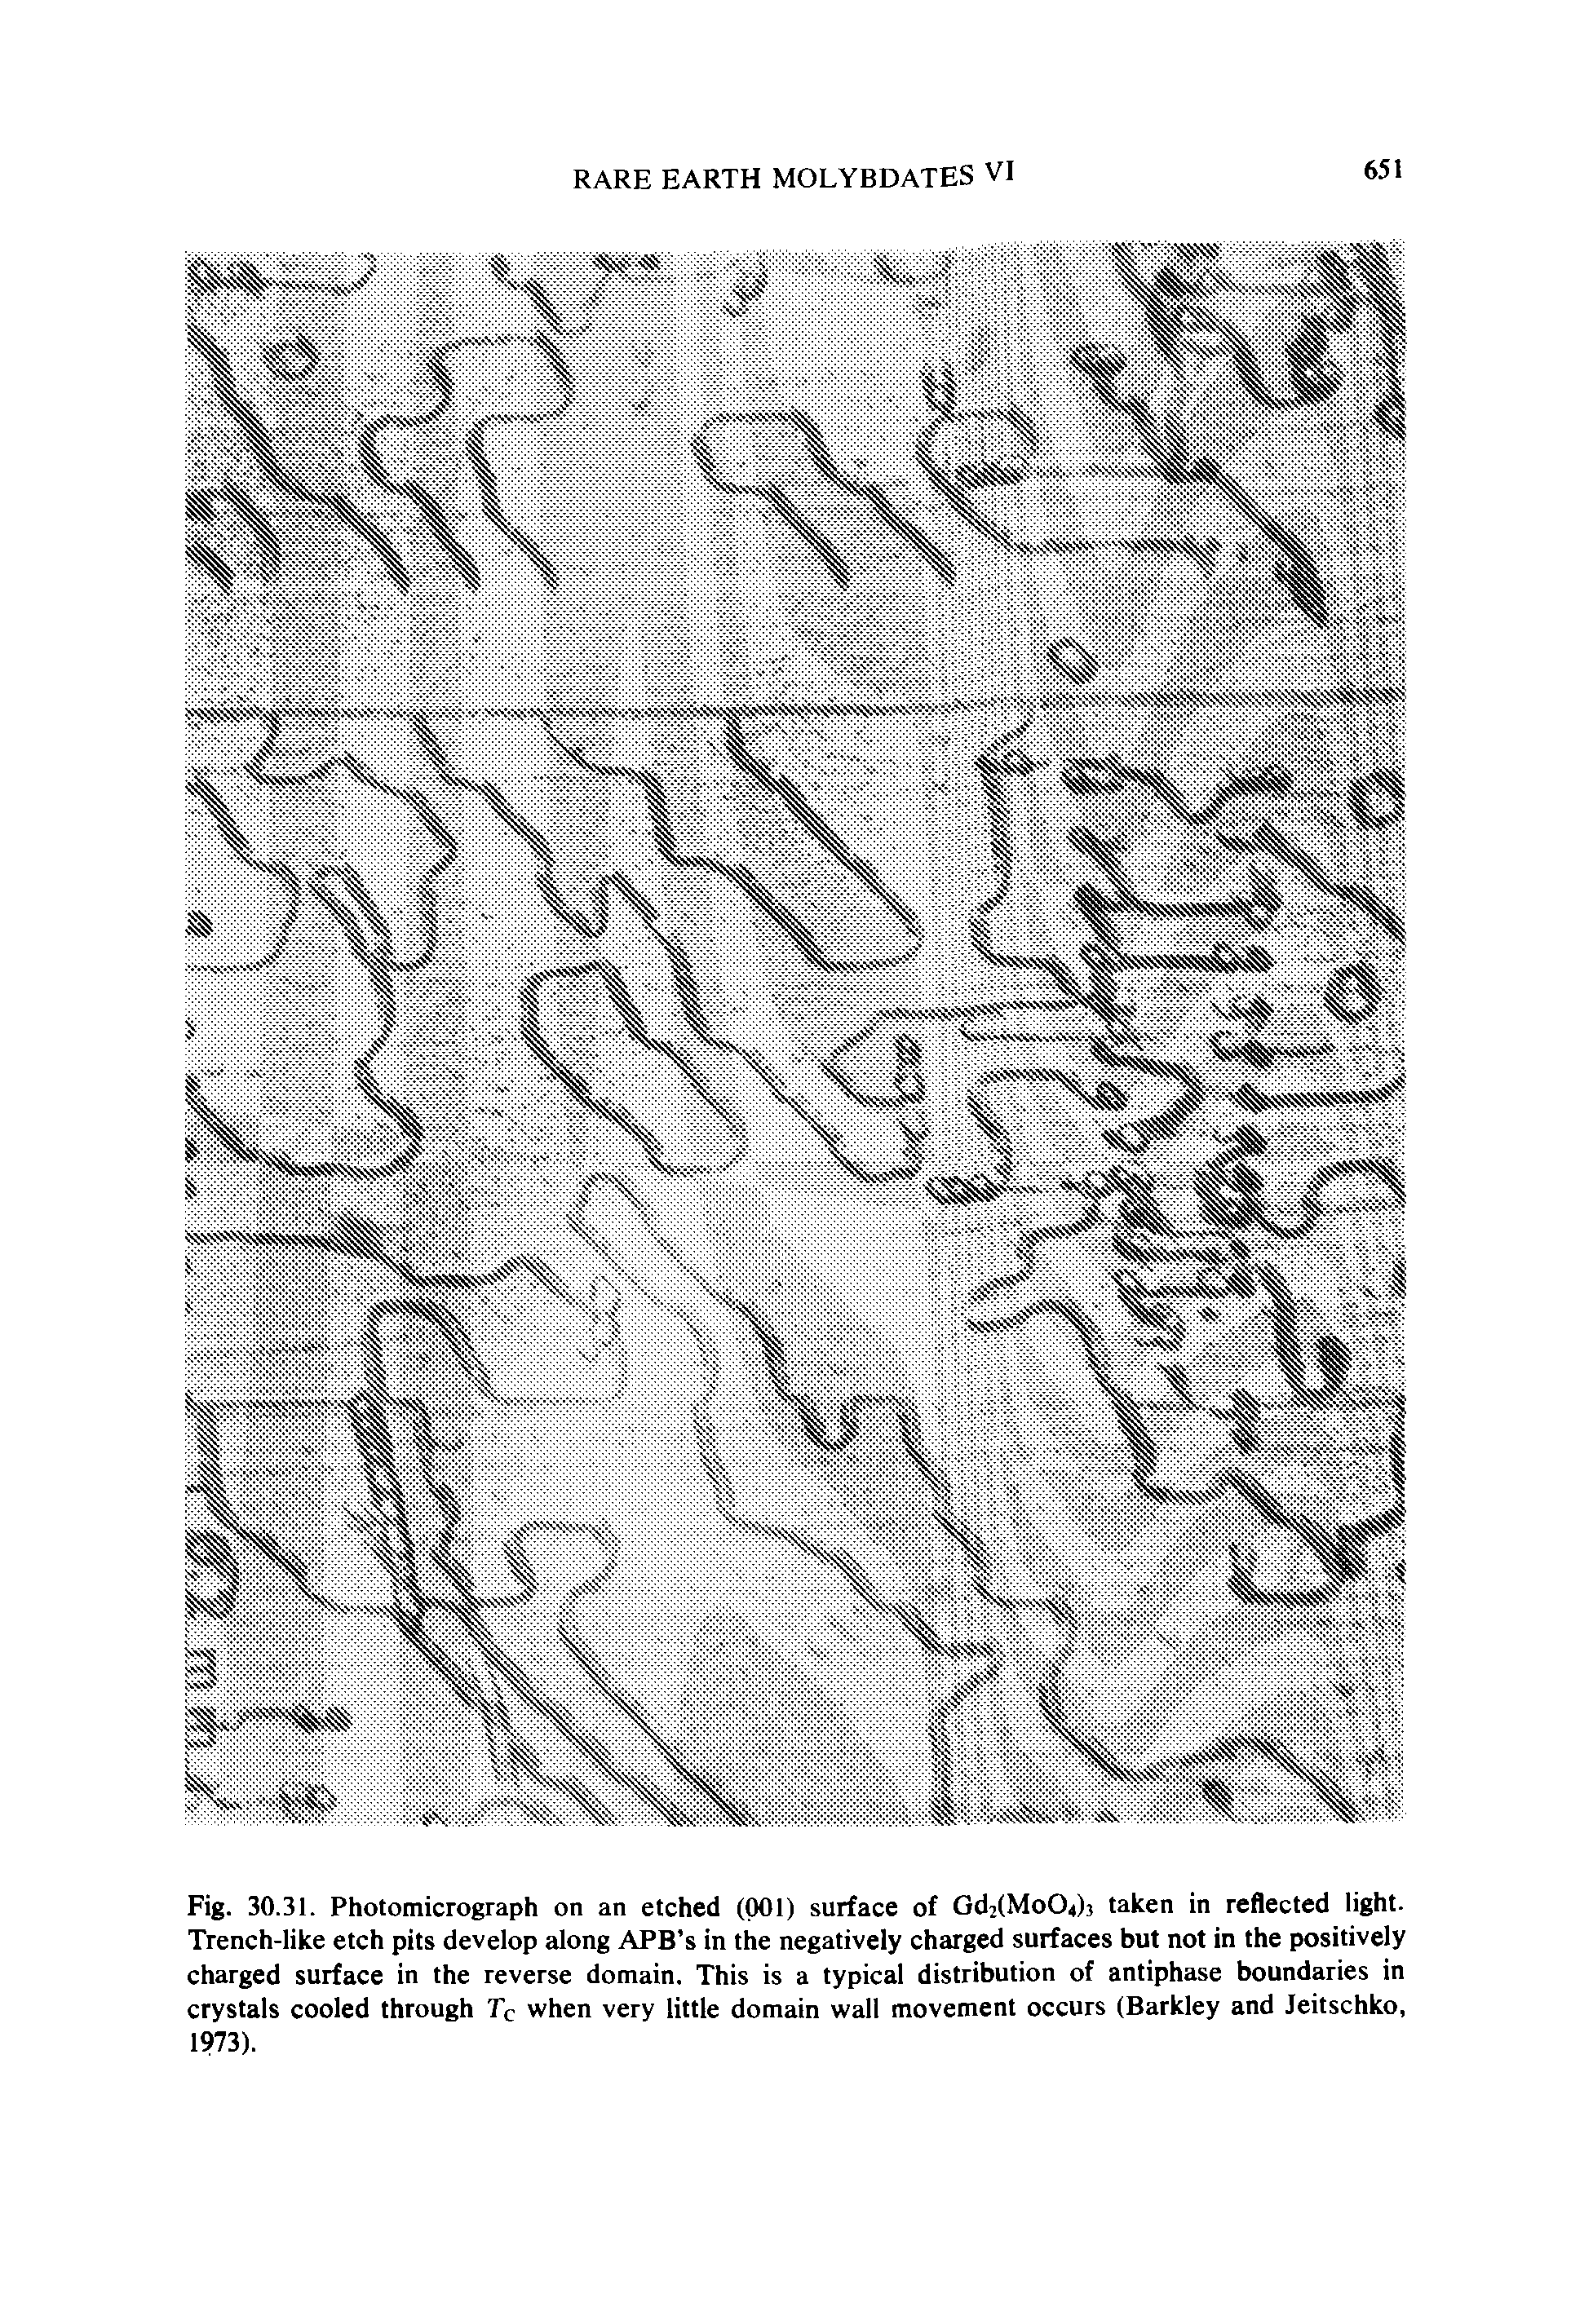 Fig. 30.31. Photomicrograph on an etched (001) surface of Gd2(Mo04)j taken in reflected light. Trench-like etch pits develop along APB s in the negatively charged surfaces but not in the positively charged surface in the reverse domain. This is a typical distribution of antiphase boundaries in crystals cooled through Tc when very little domain wall movement occurs (Barkley and Jeitschko, 1973).